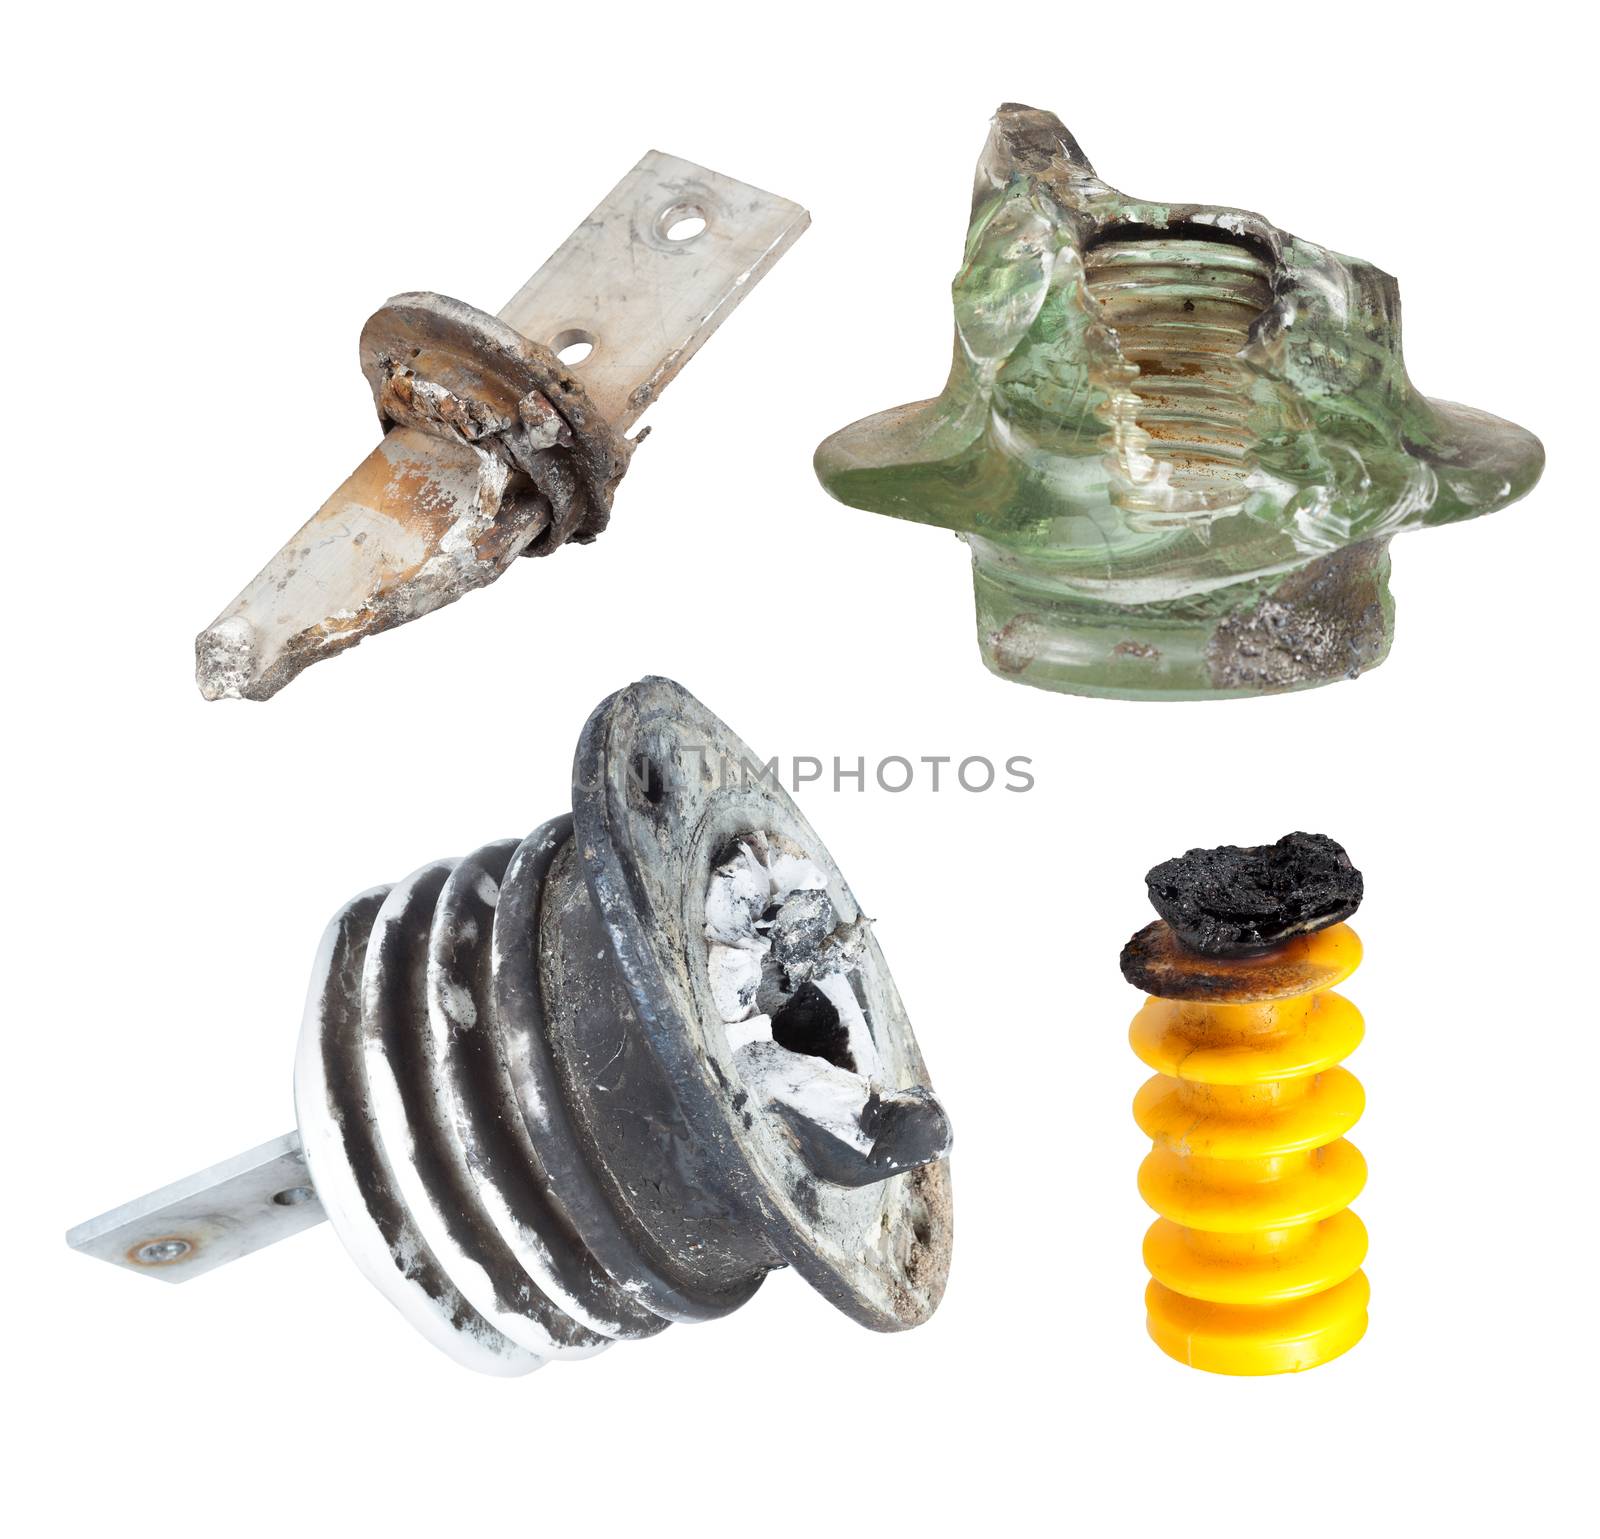 Fragments of defect of insulators for High Voltage. Collage isolated on white background